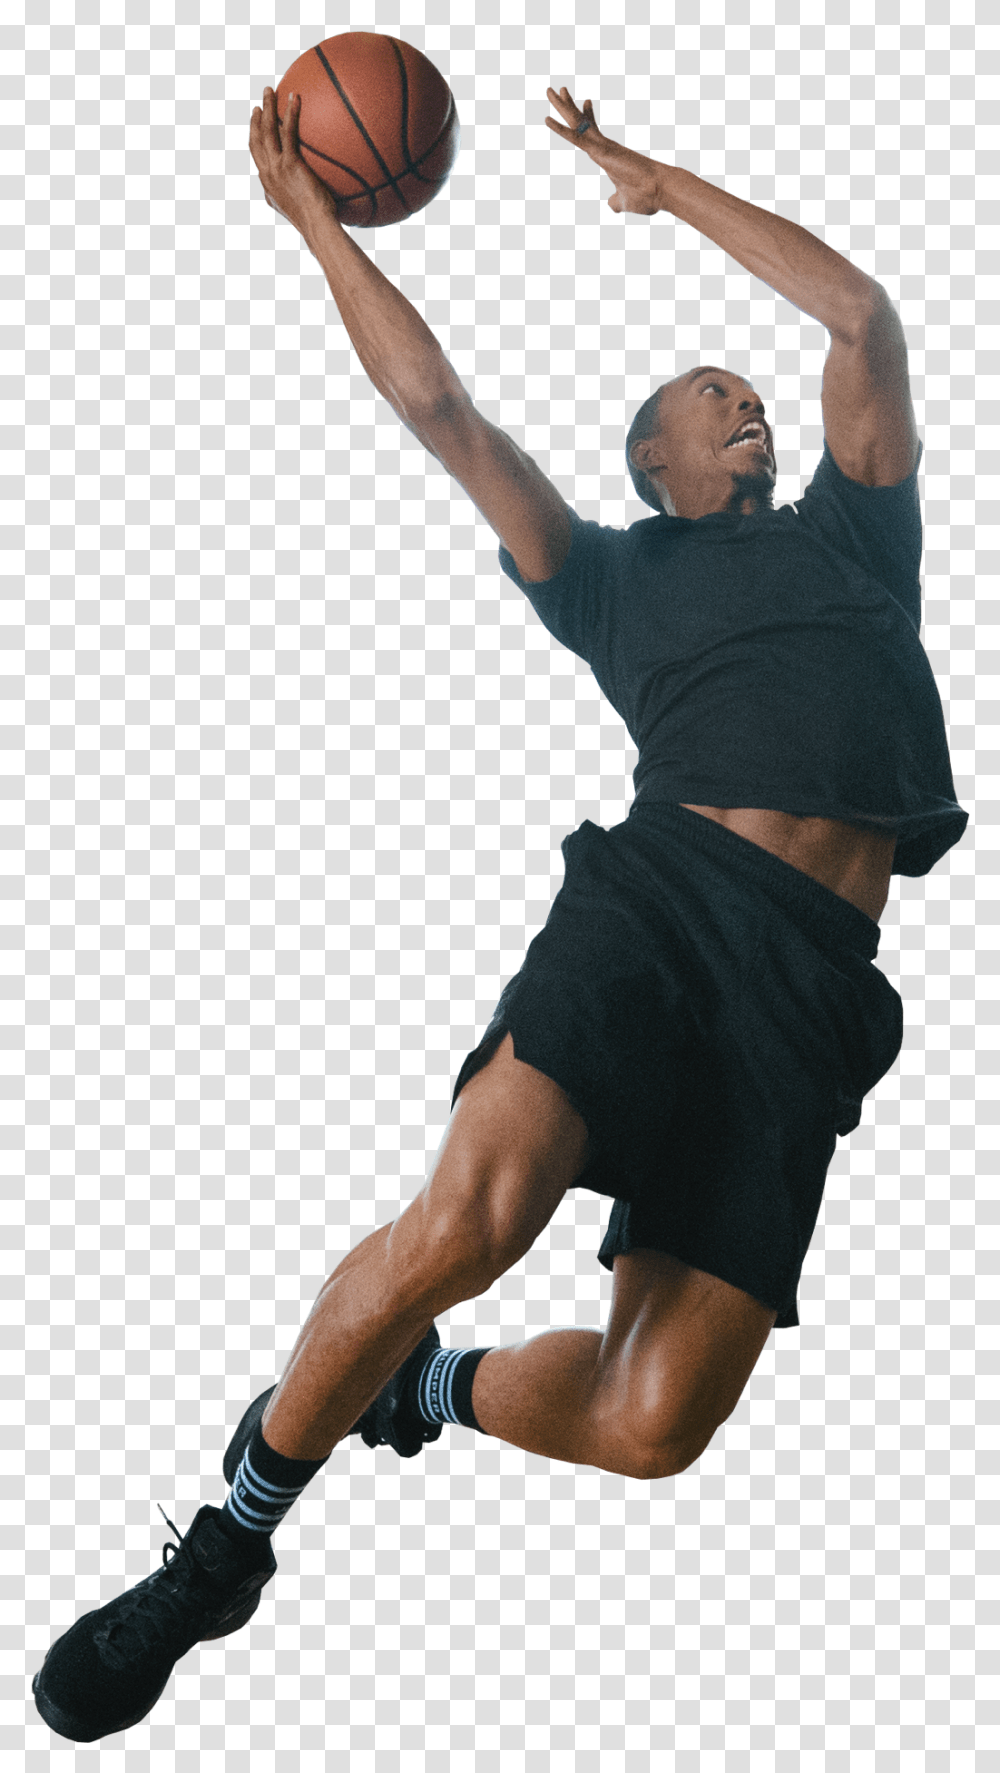 Athlete Background Image Athlete, Dance Pose, Leisure Activities, Person, Clothing Transparent Png